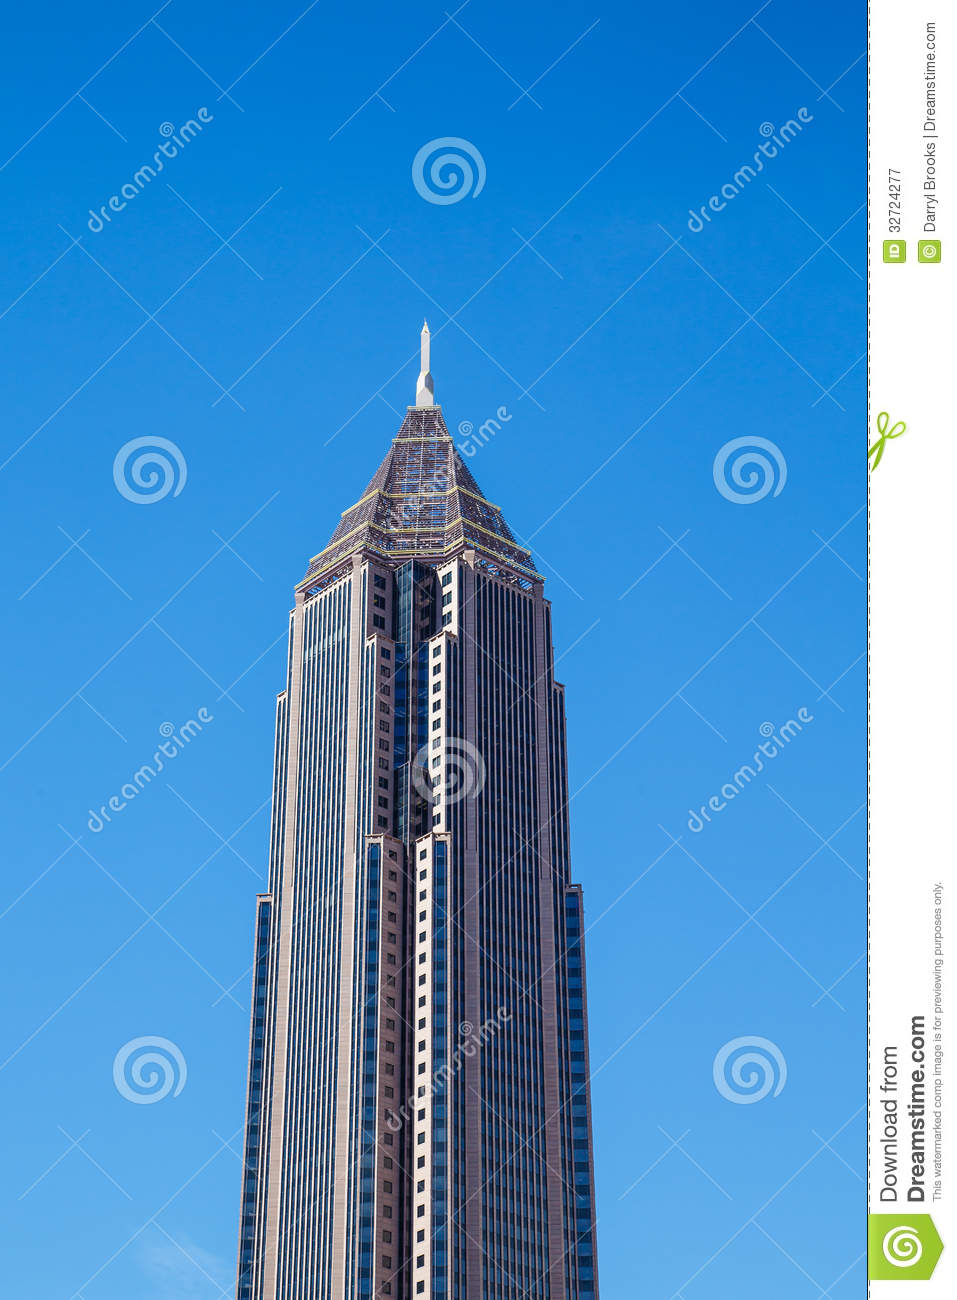 New Brown Skyscraper Under Blue Sky Royalty Free Stock Photography